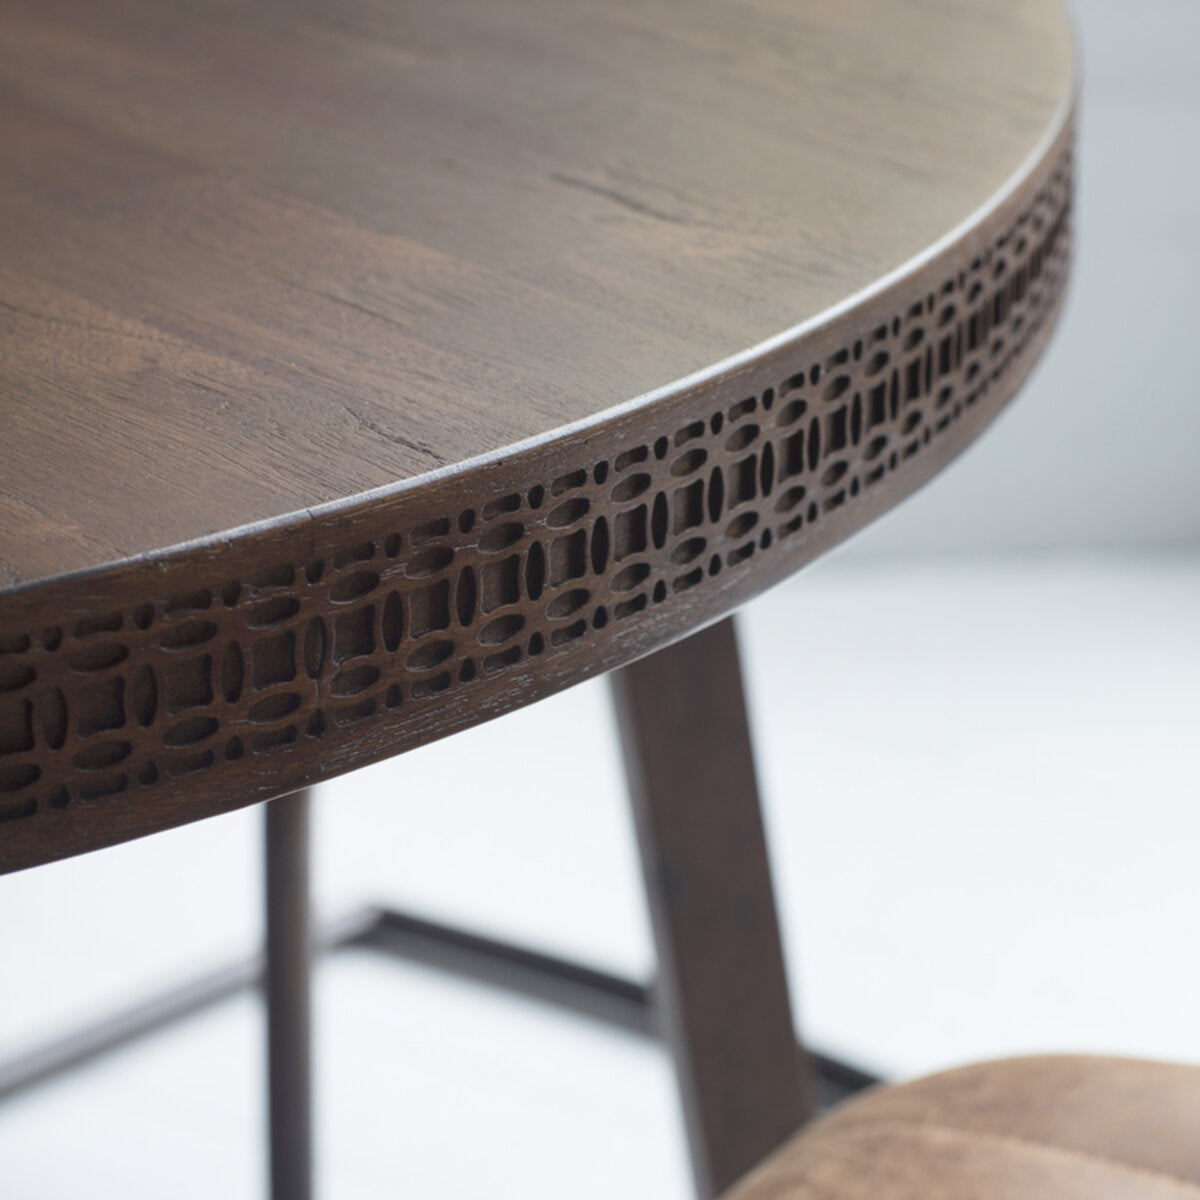 Mila Round Dining Table| Brown